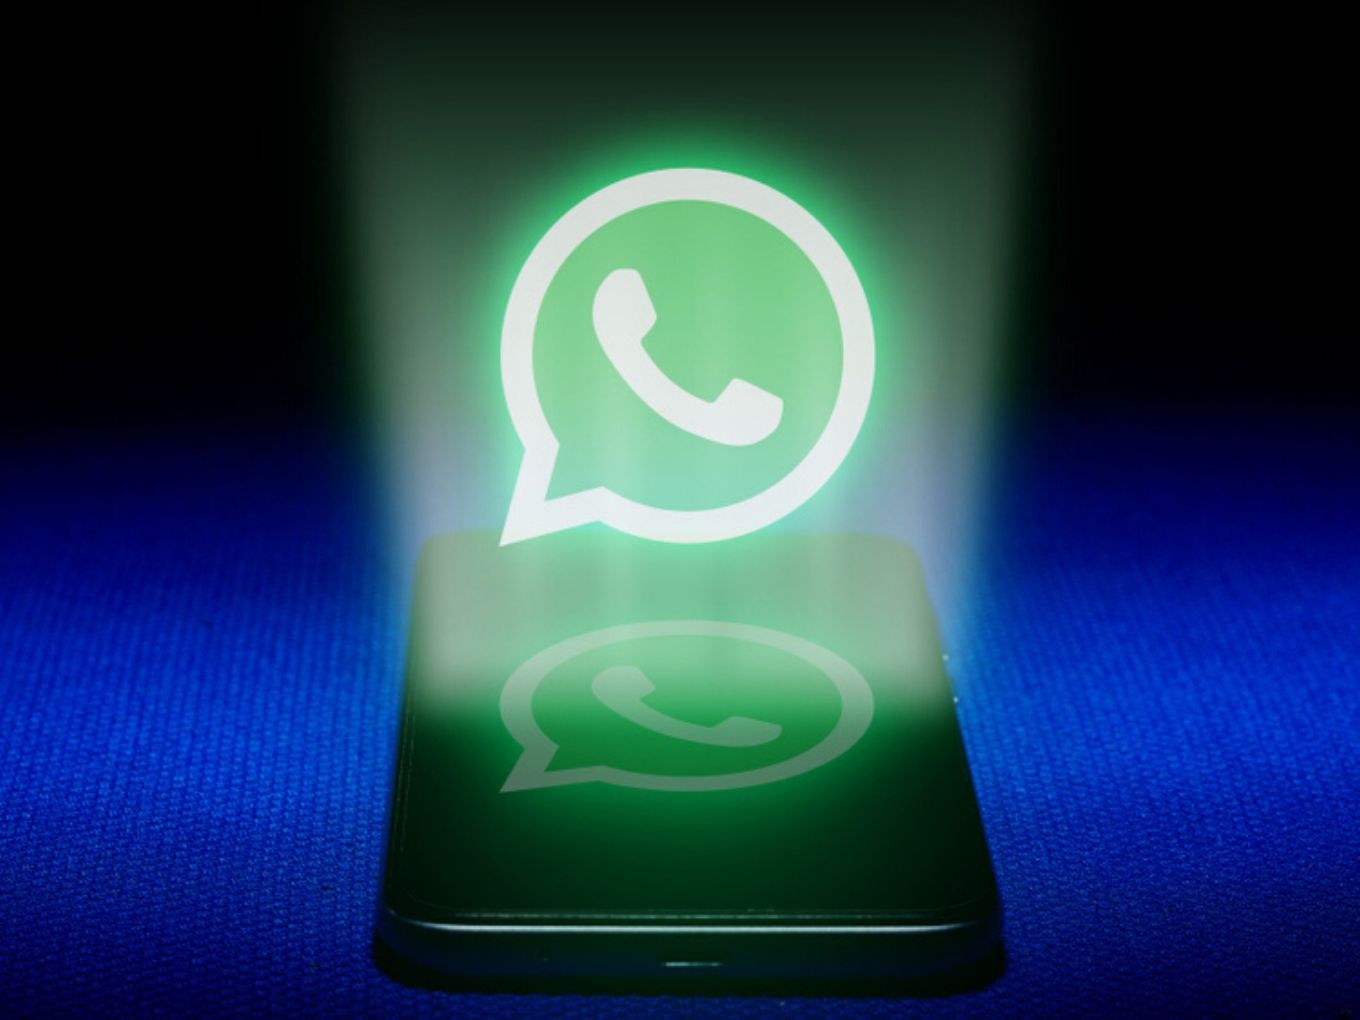 WhatsApp Payments Gets Indian Government's Approval